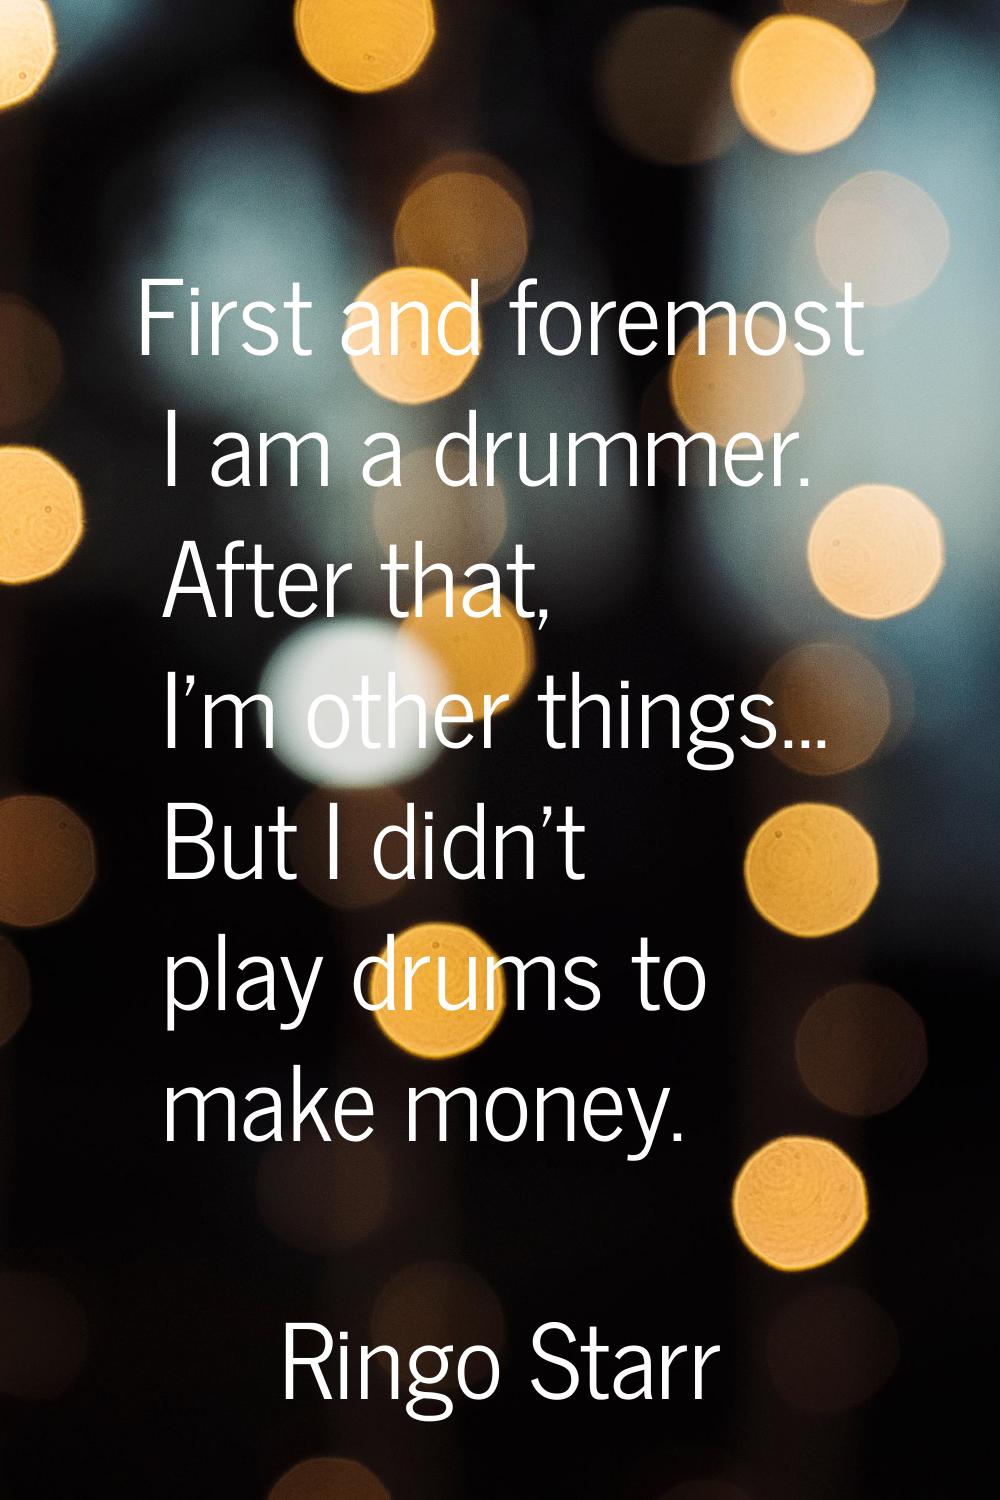 First and foremost I am a drummer. After that, I'm other things... But I didn't play drums to make 